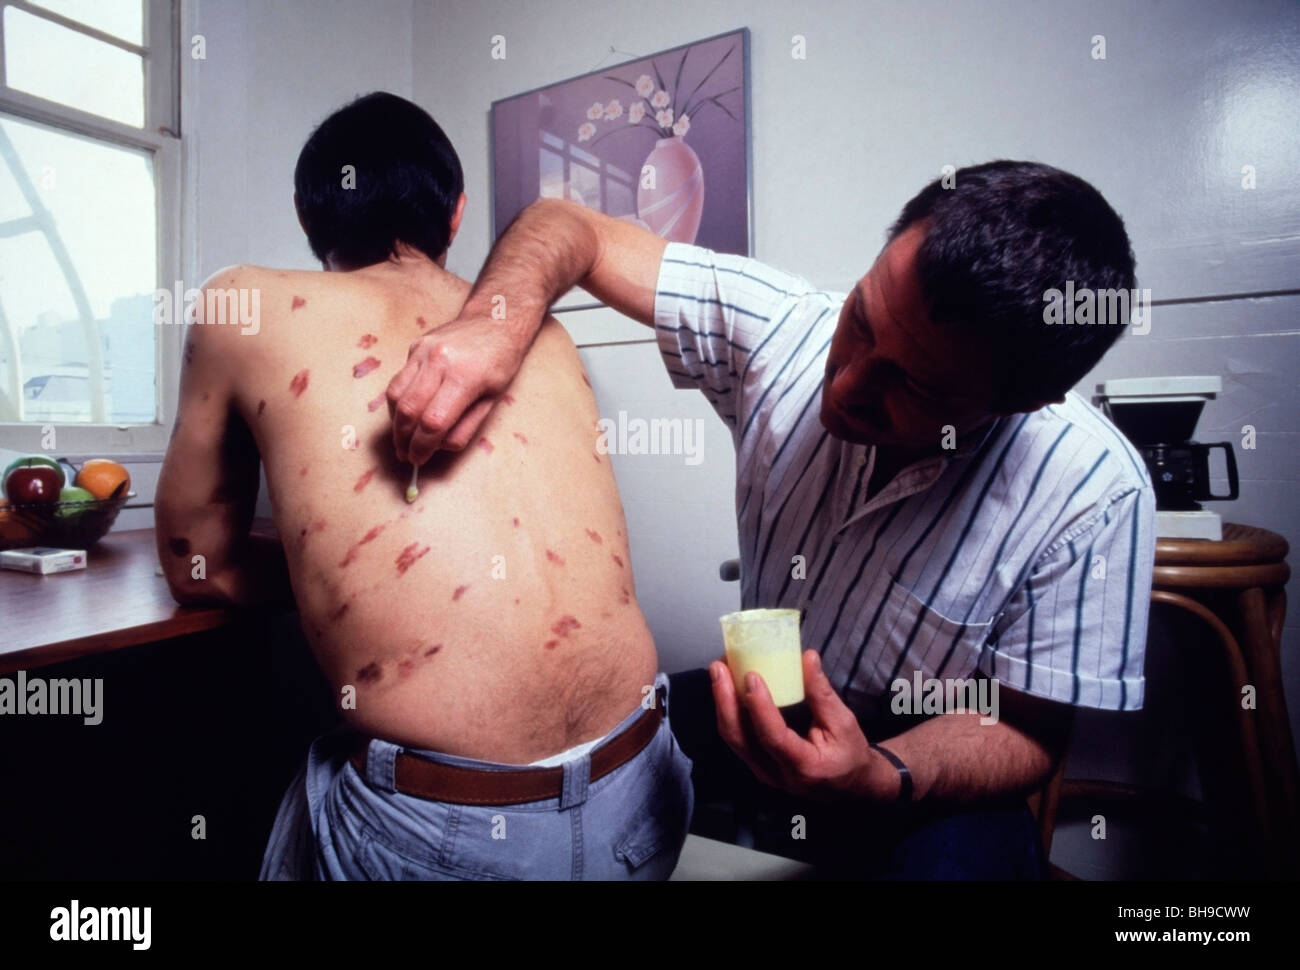 Applying DNCB lotion to an HIV/AIDS patient with Kaposi's Sarcoma lesions in San Francisco, California Stock Photo